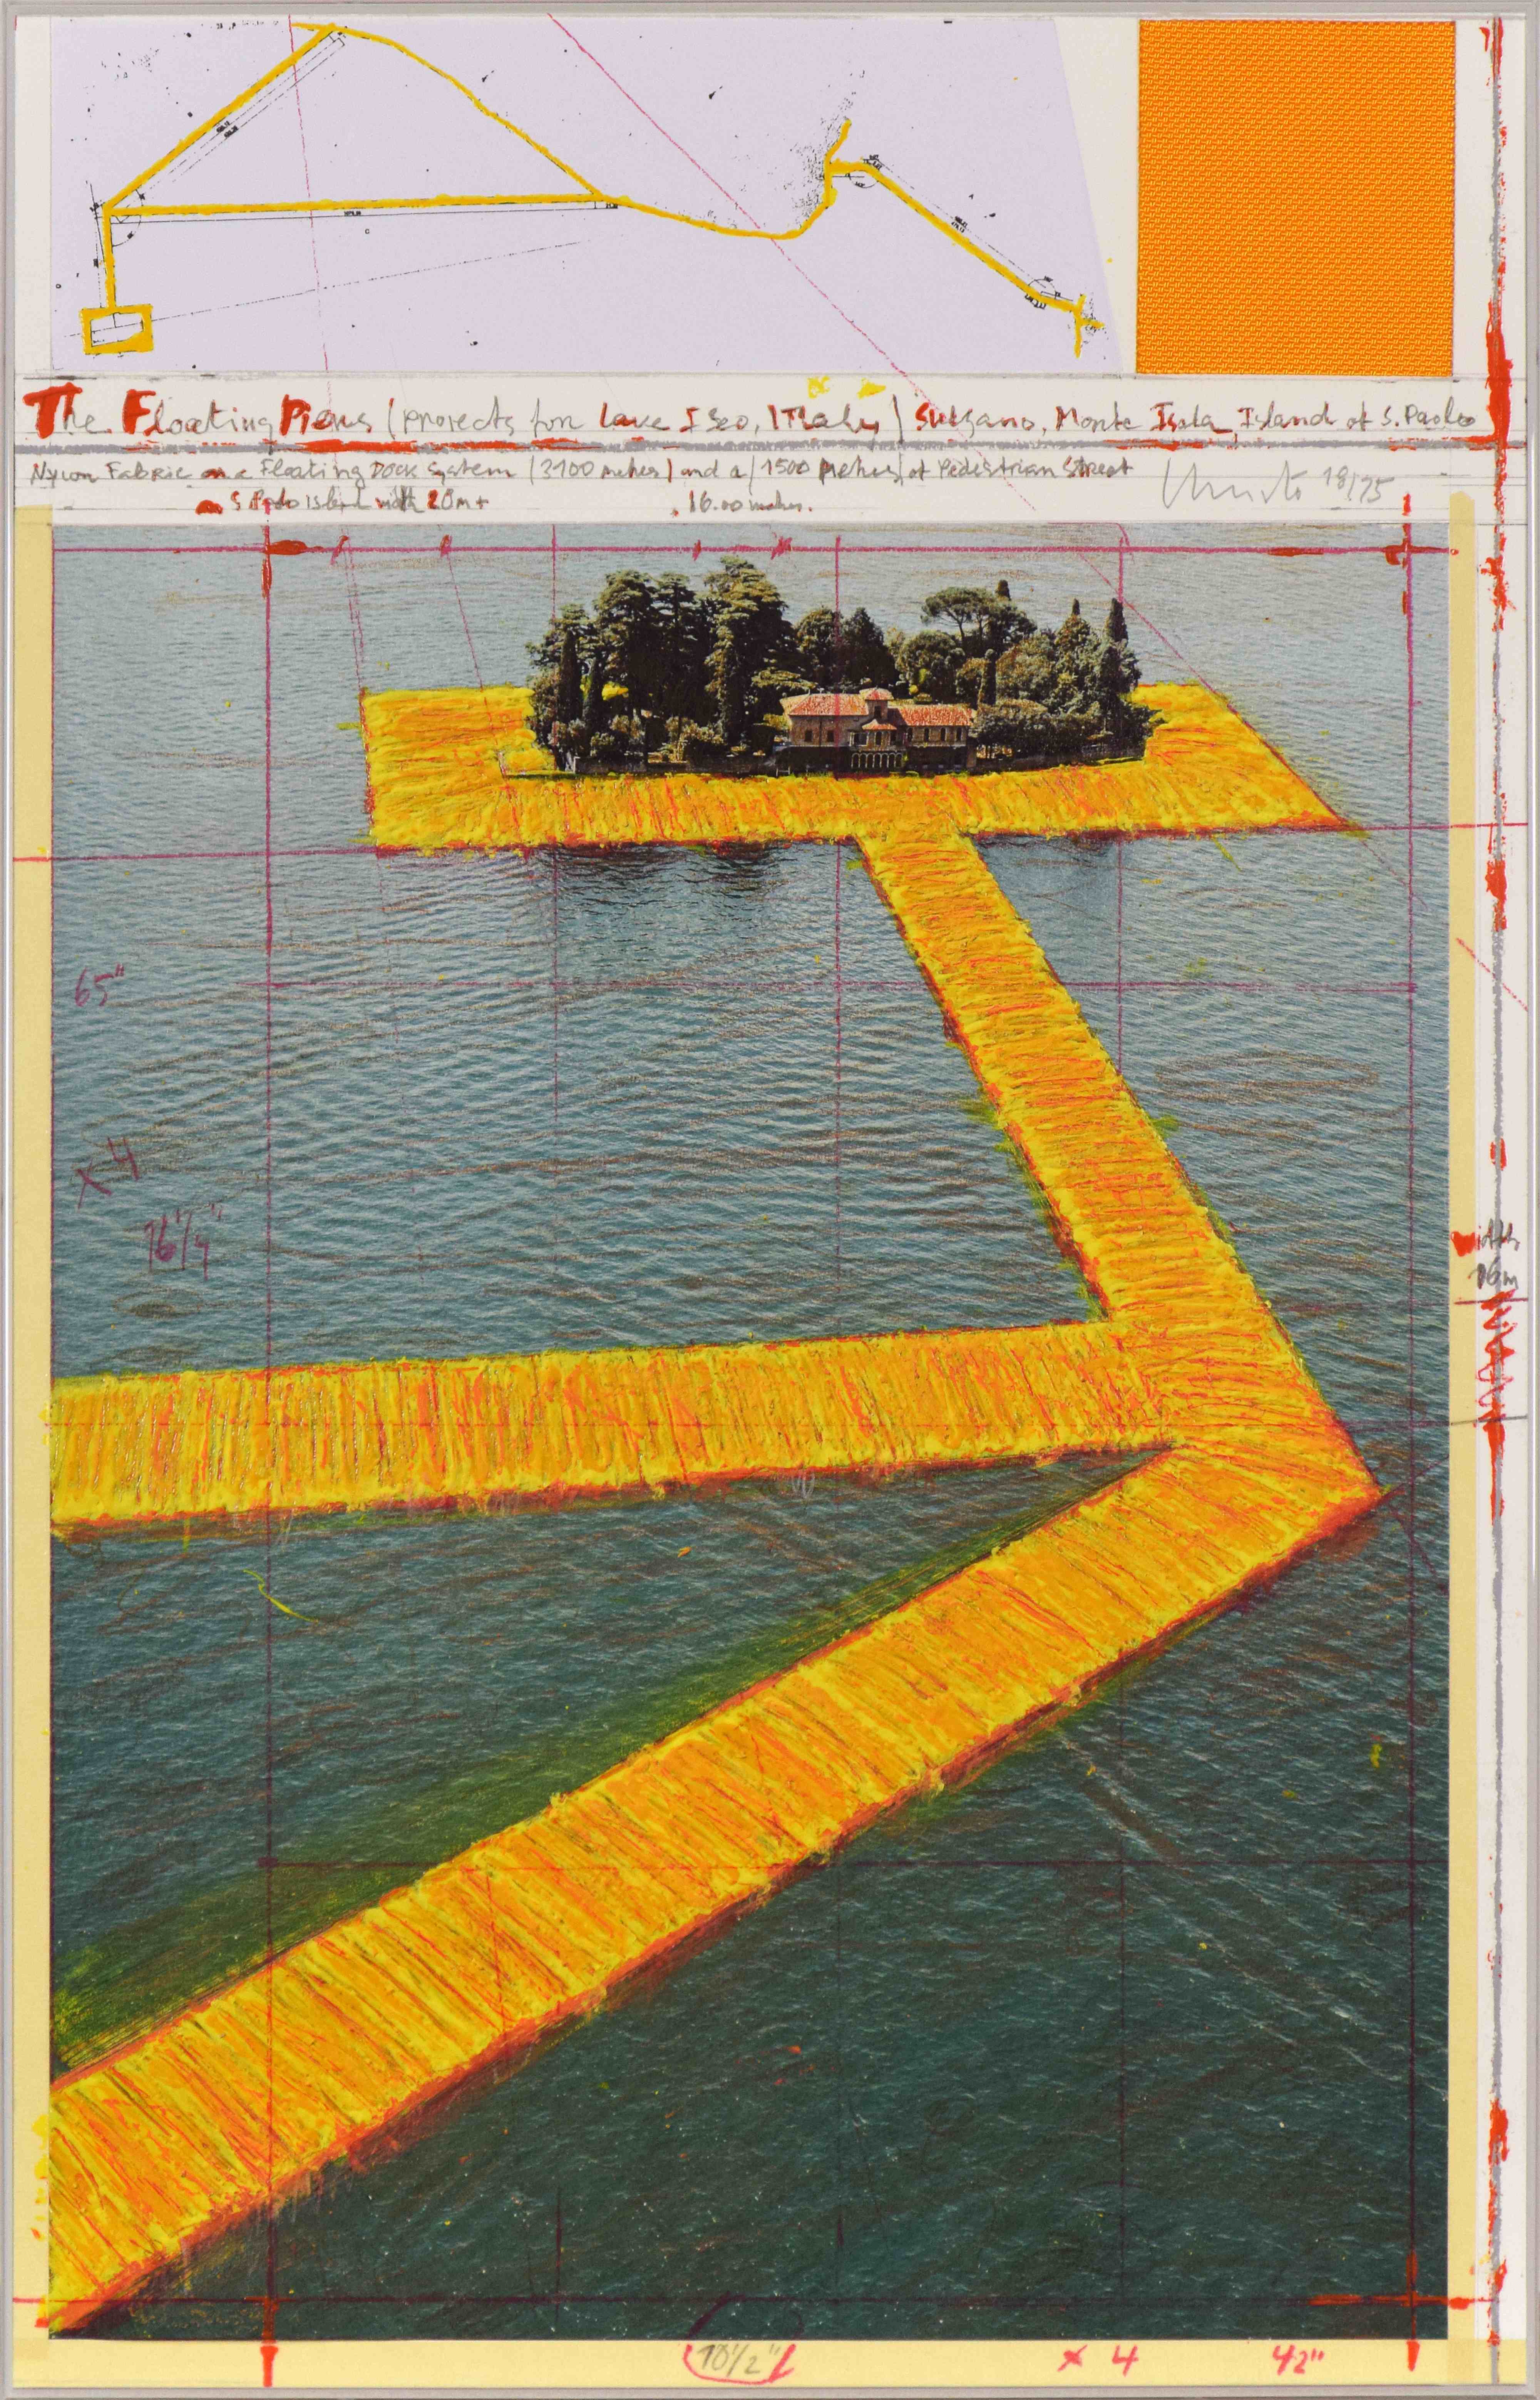 Floating Piers (Project for Lake Iseo, Italy) © Christo